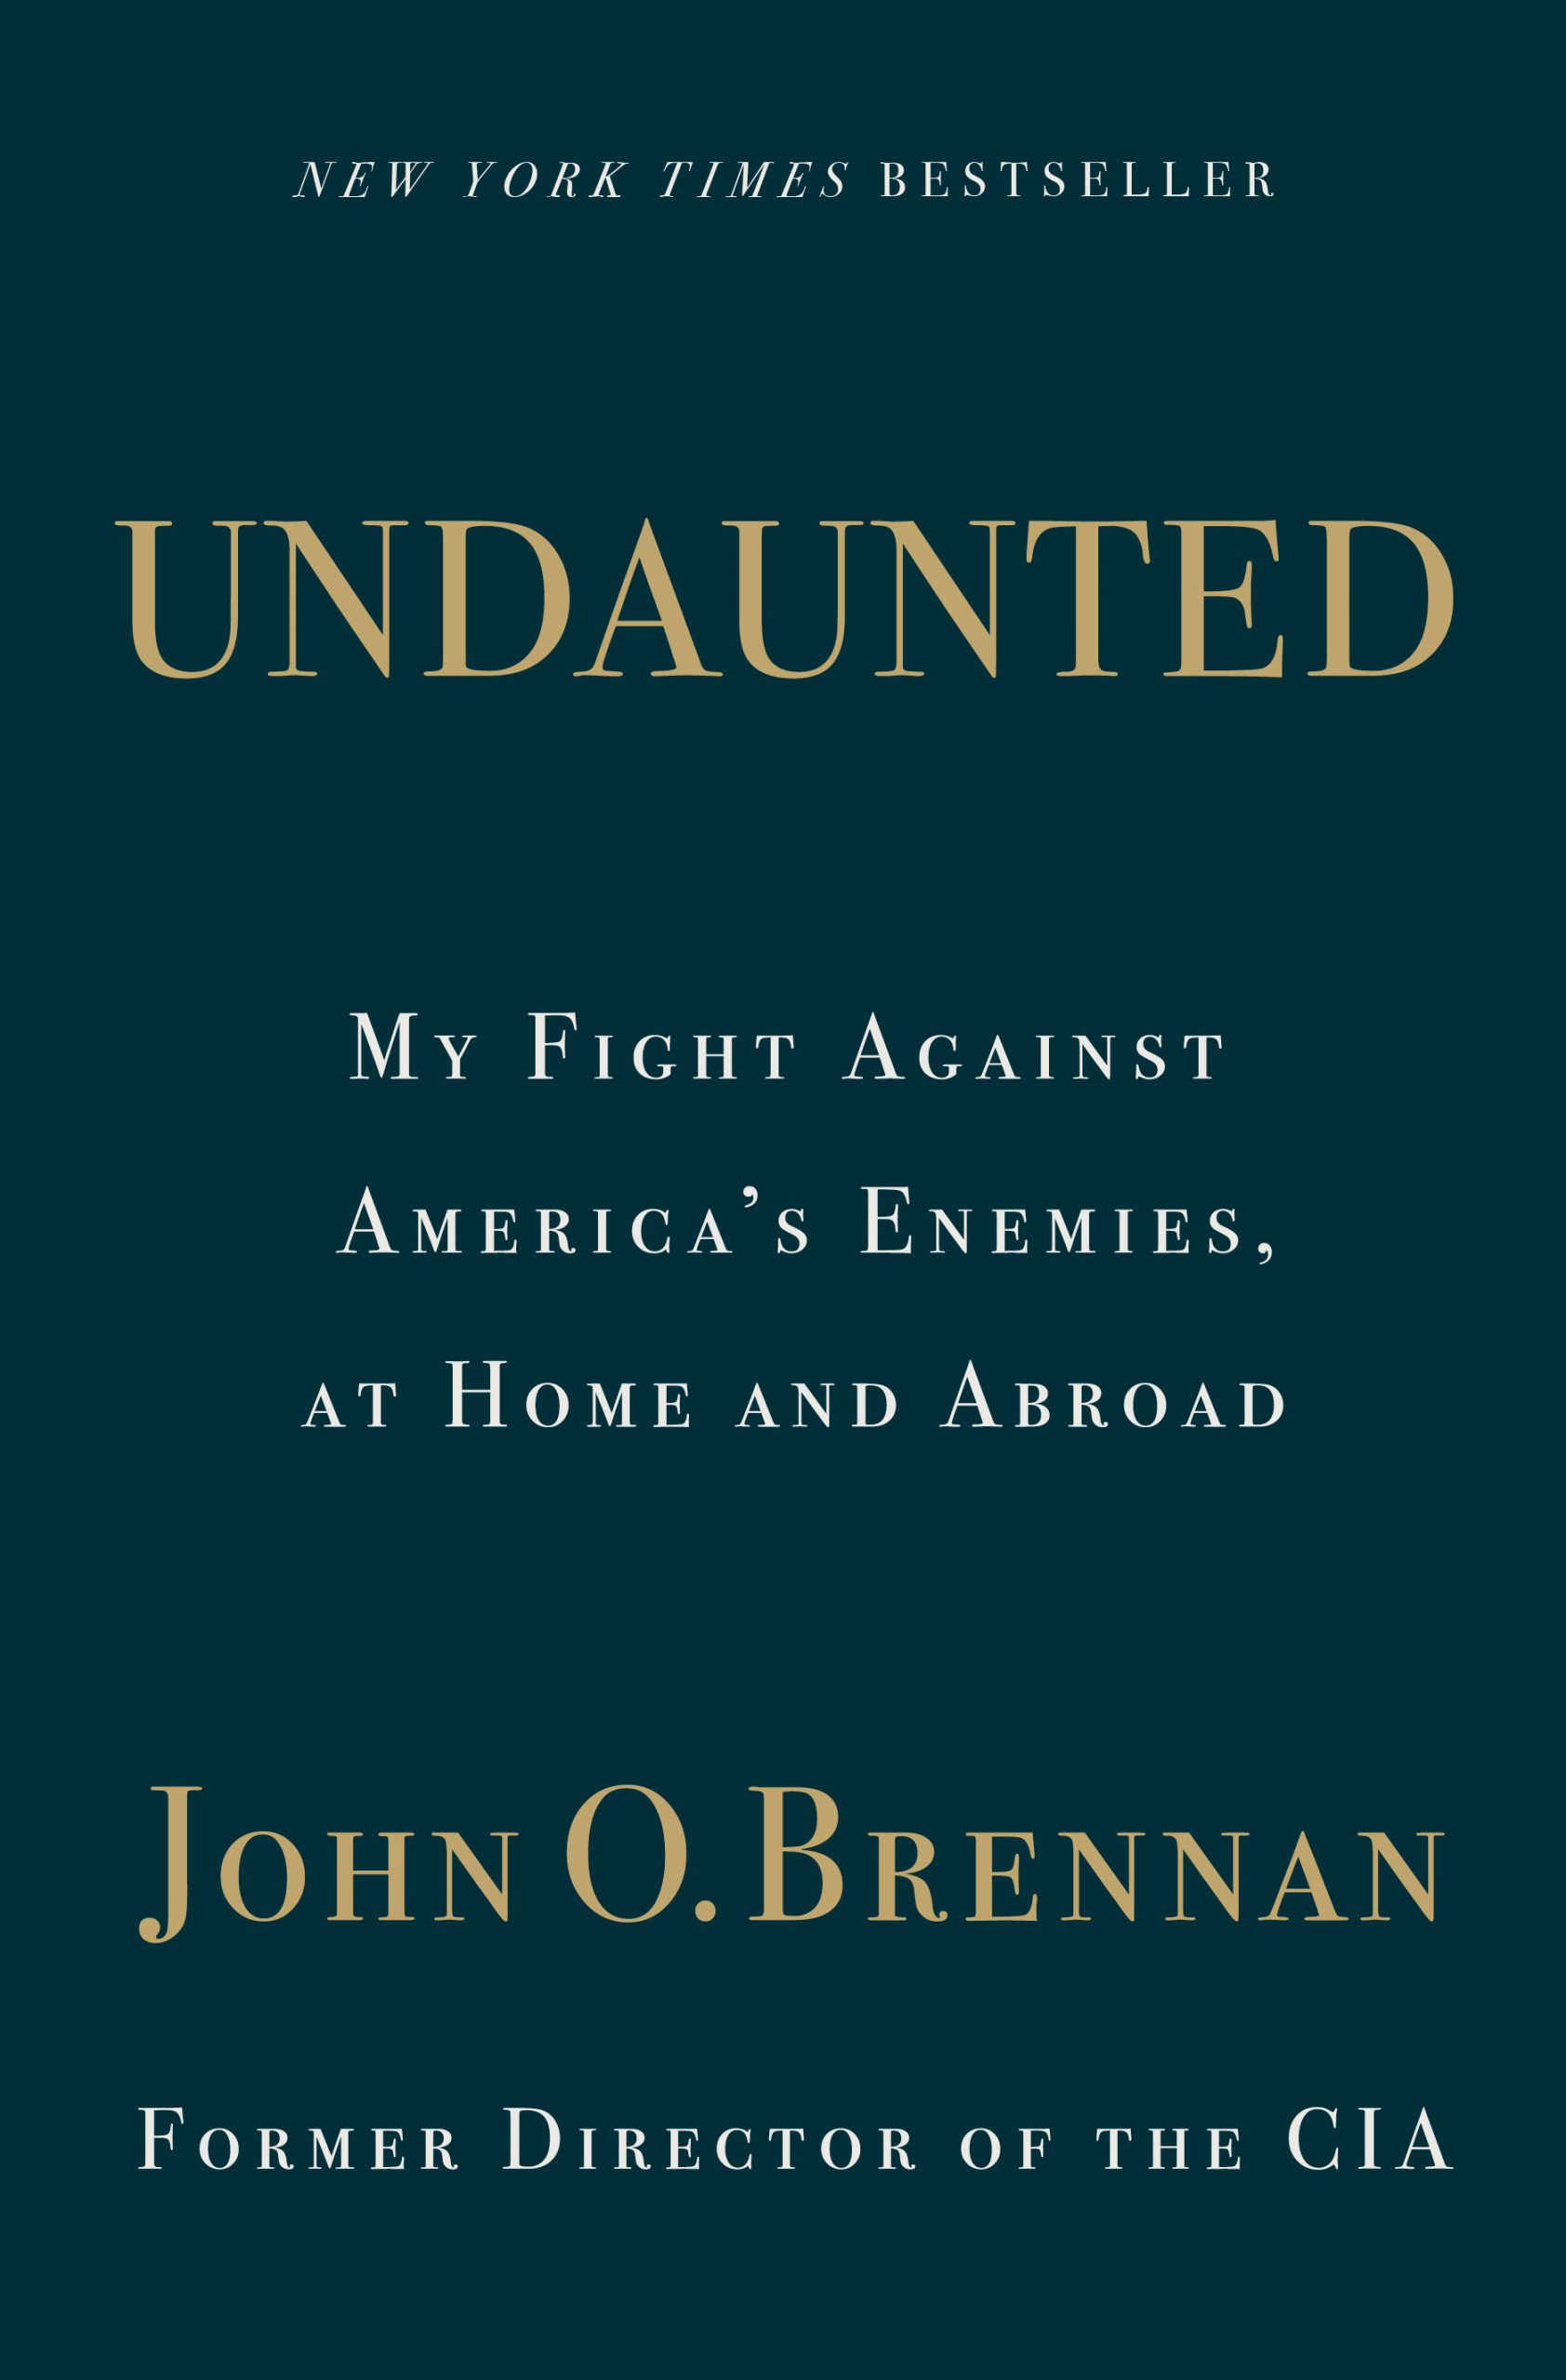 Cover of the book "undaunted: my fight against america's enemies, at home and abroad" by john o. brennan, former director of the cia, labeled as a new york times bestseller.